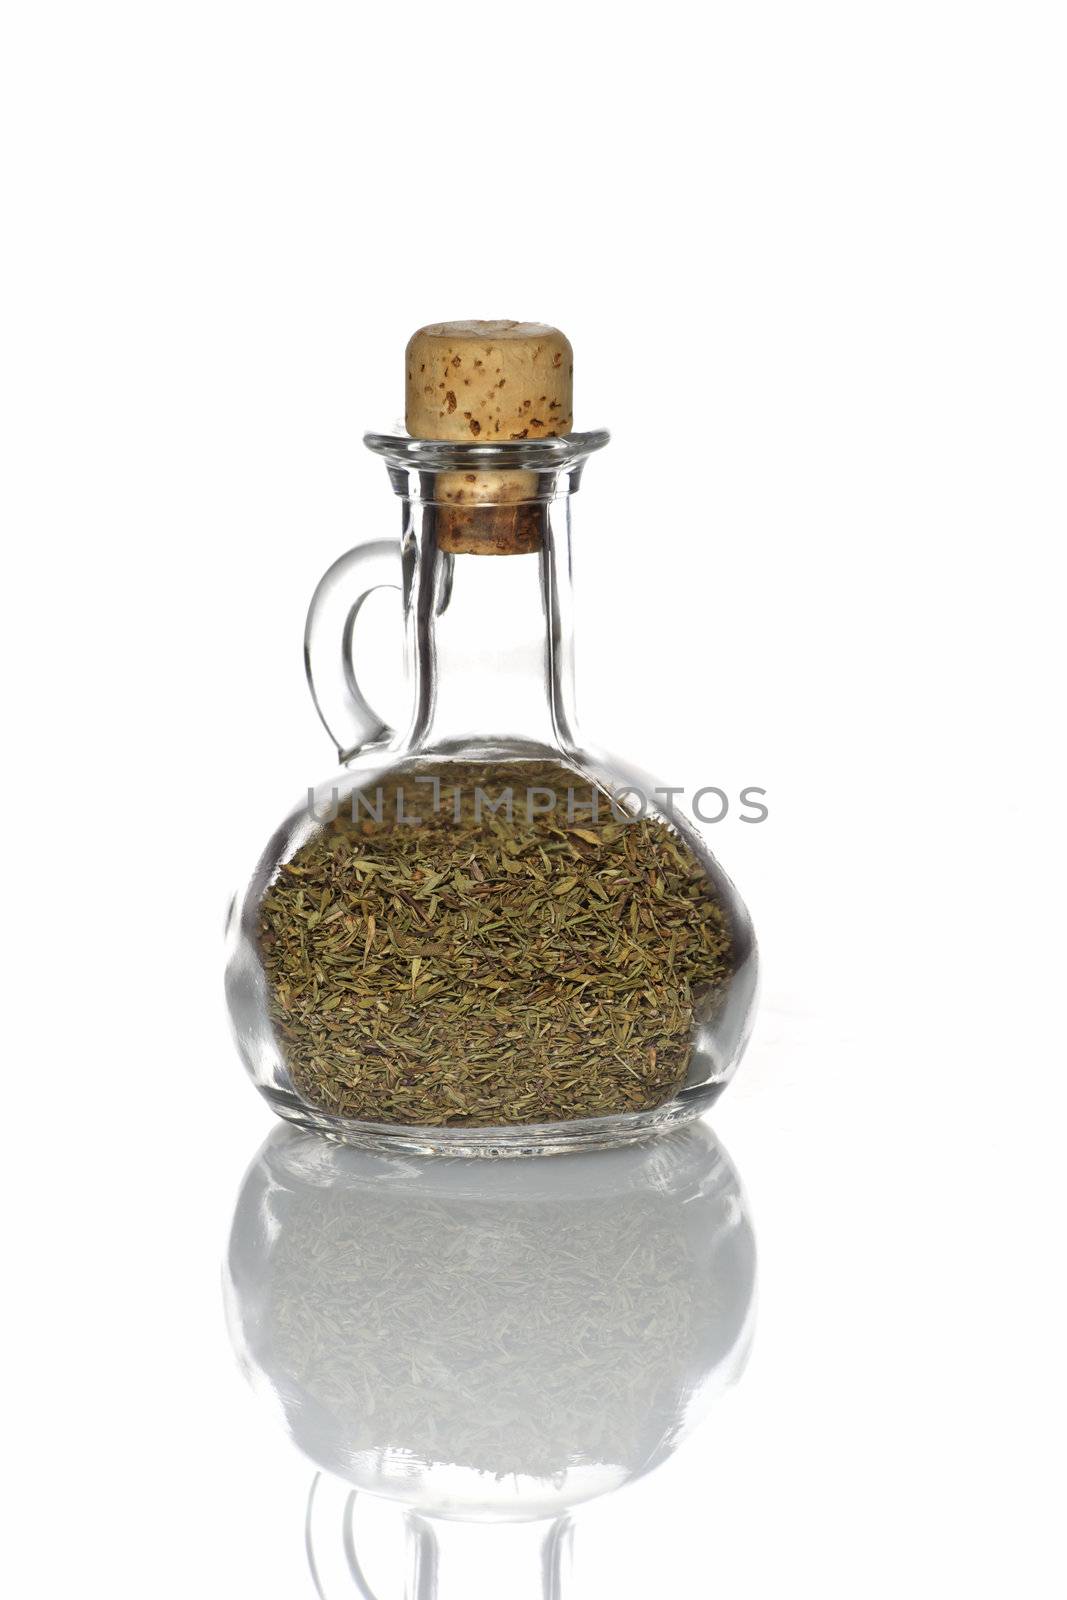 Thyme in a glass bottle with a cork and isolated with reflection on white